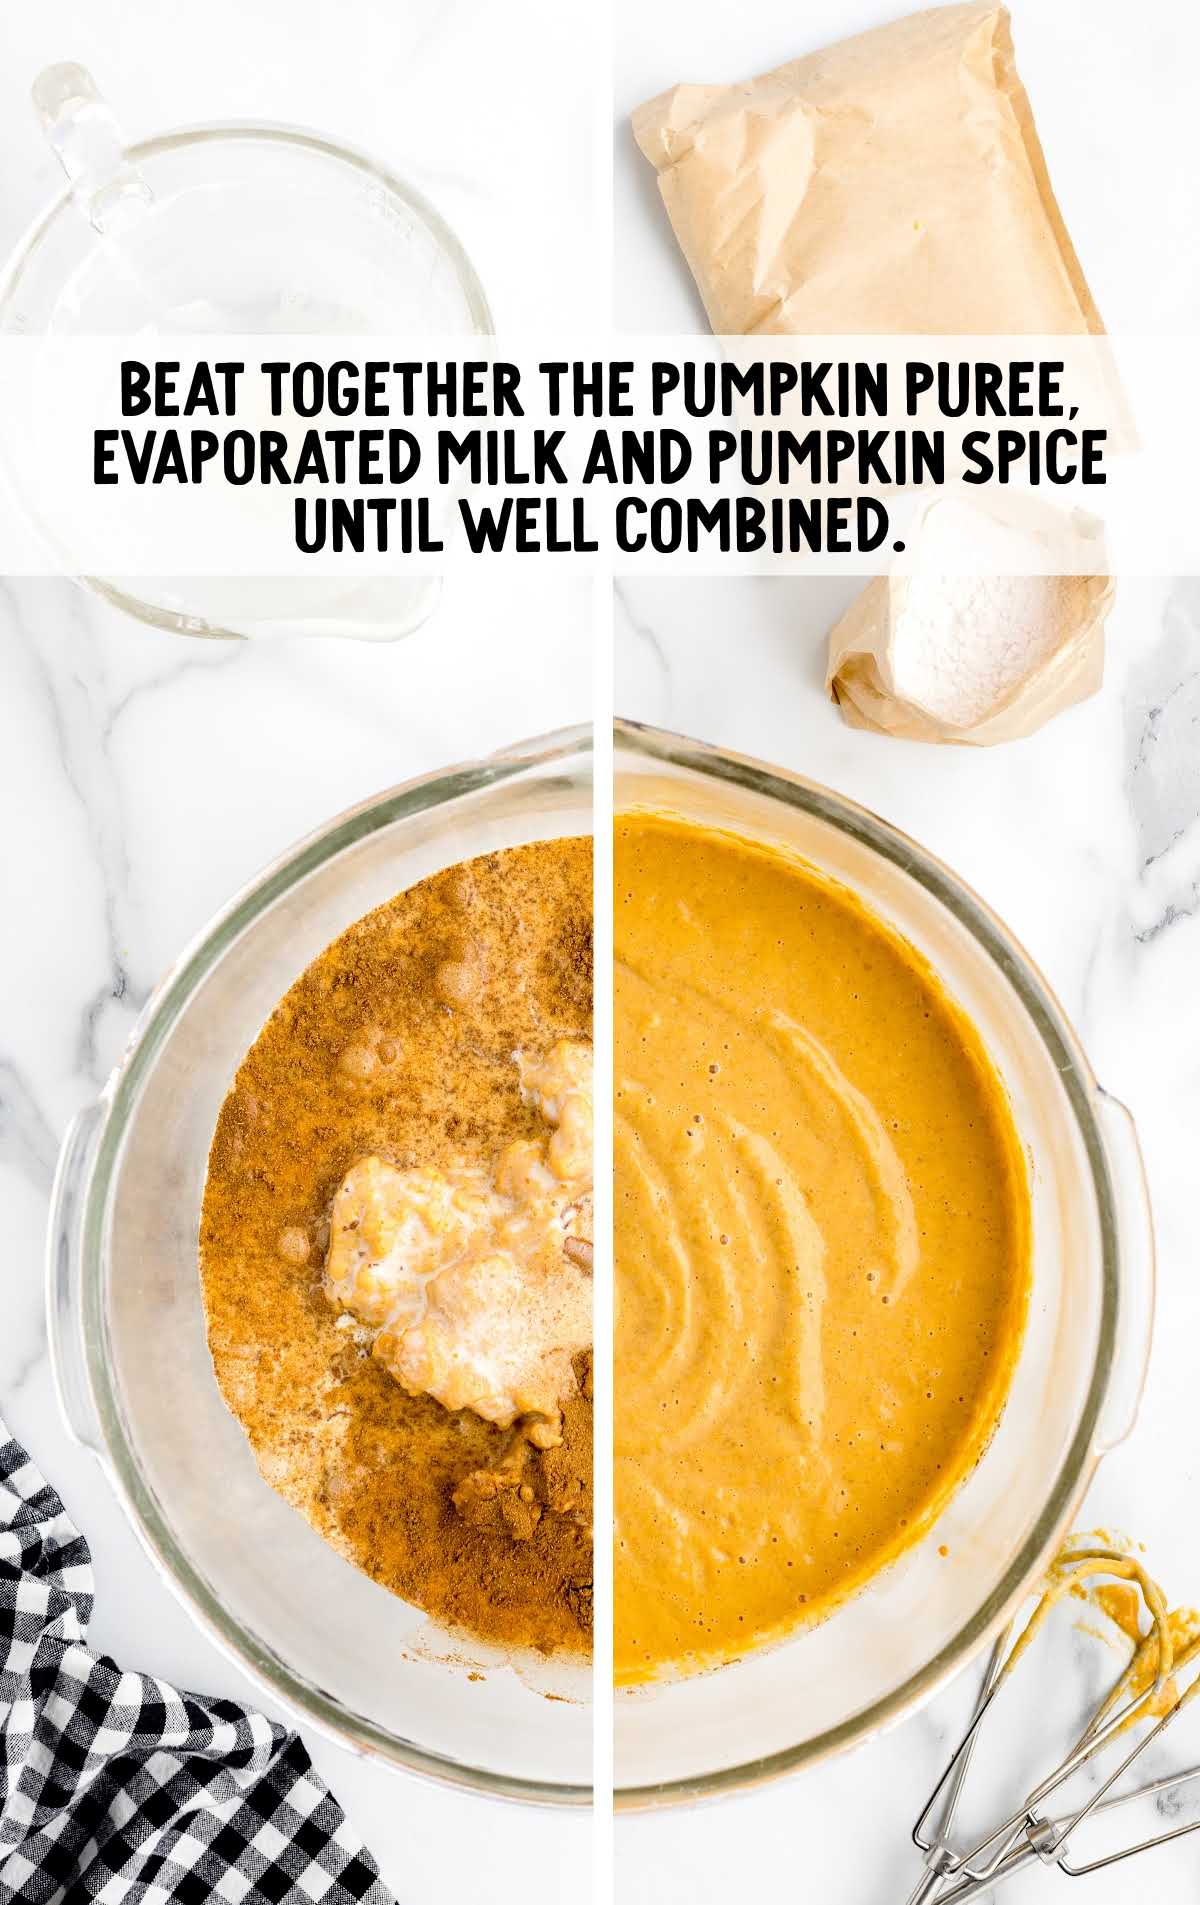 pumpkin puree, evaporated milk, and pumpkin spice combined in a bowl 